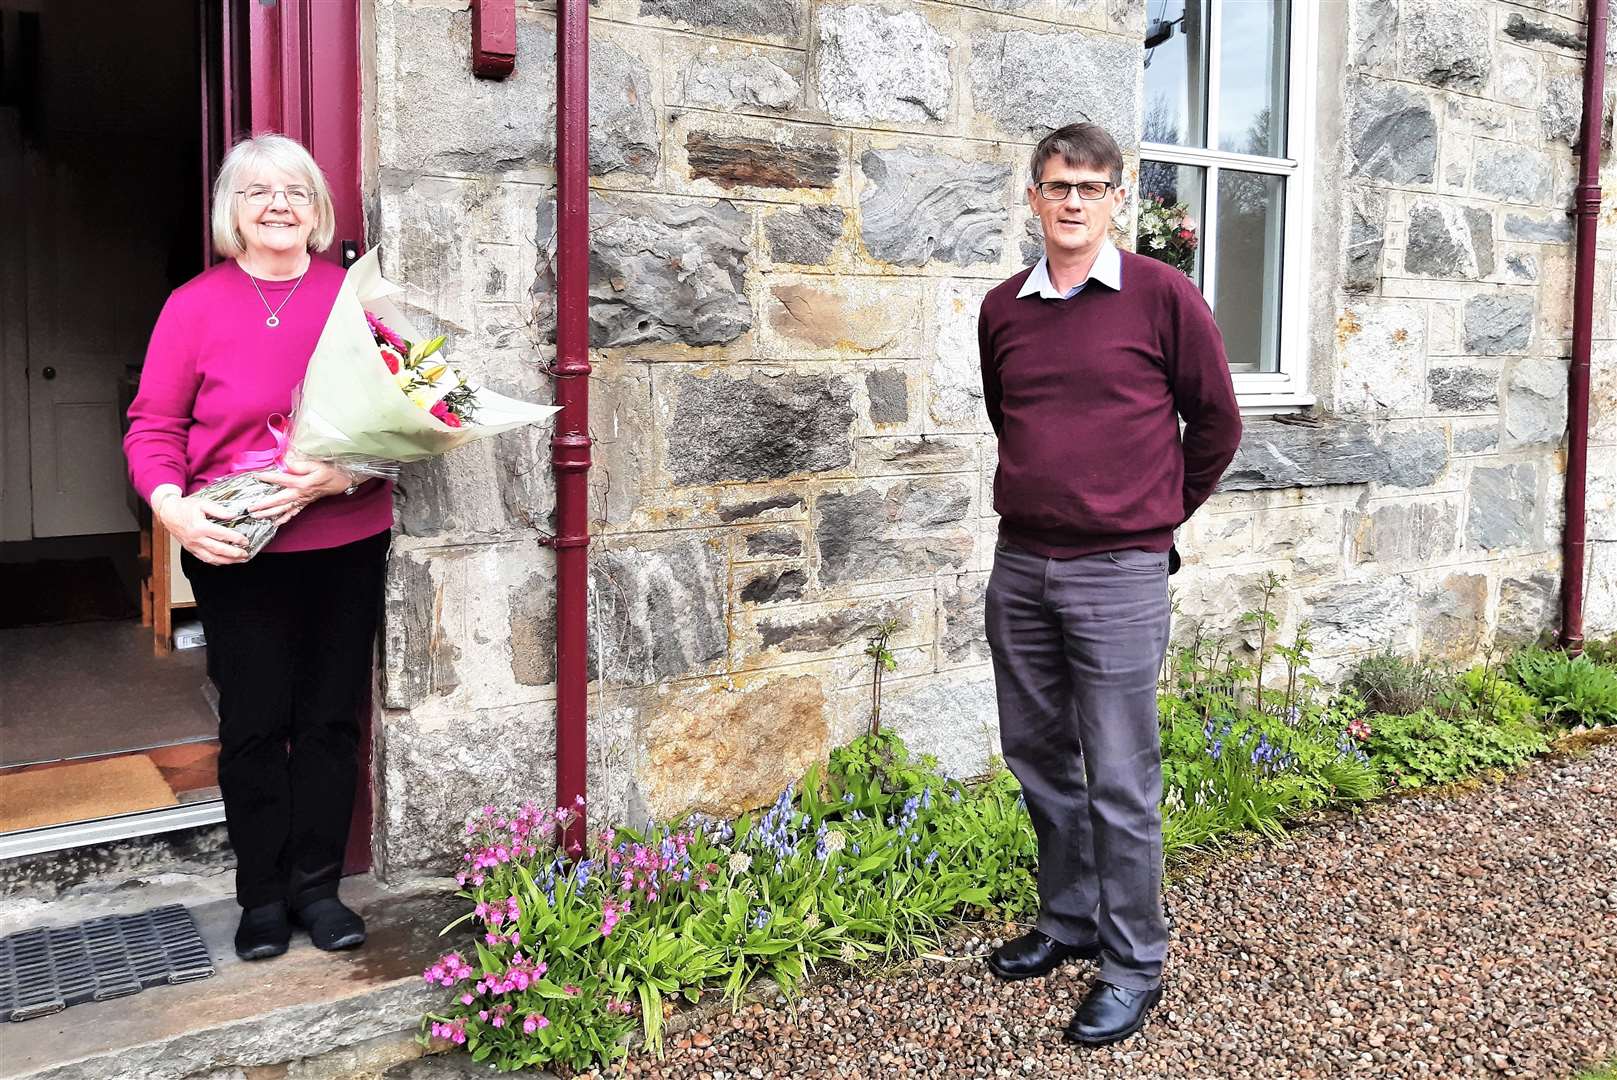 David Duff, Post Office network provision lead, presented gifts to Morag Macleod on her retiral.